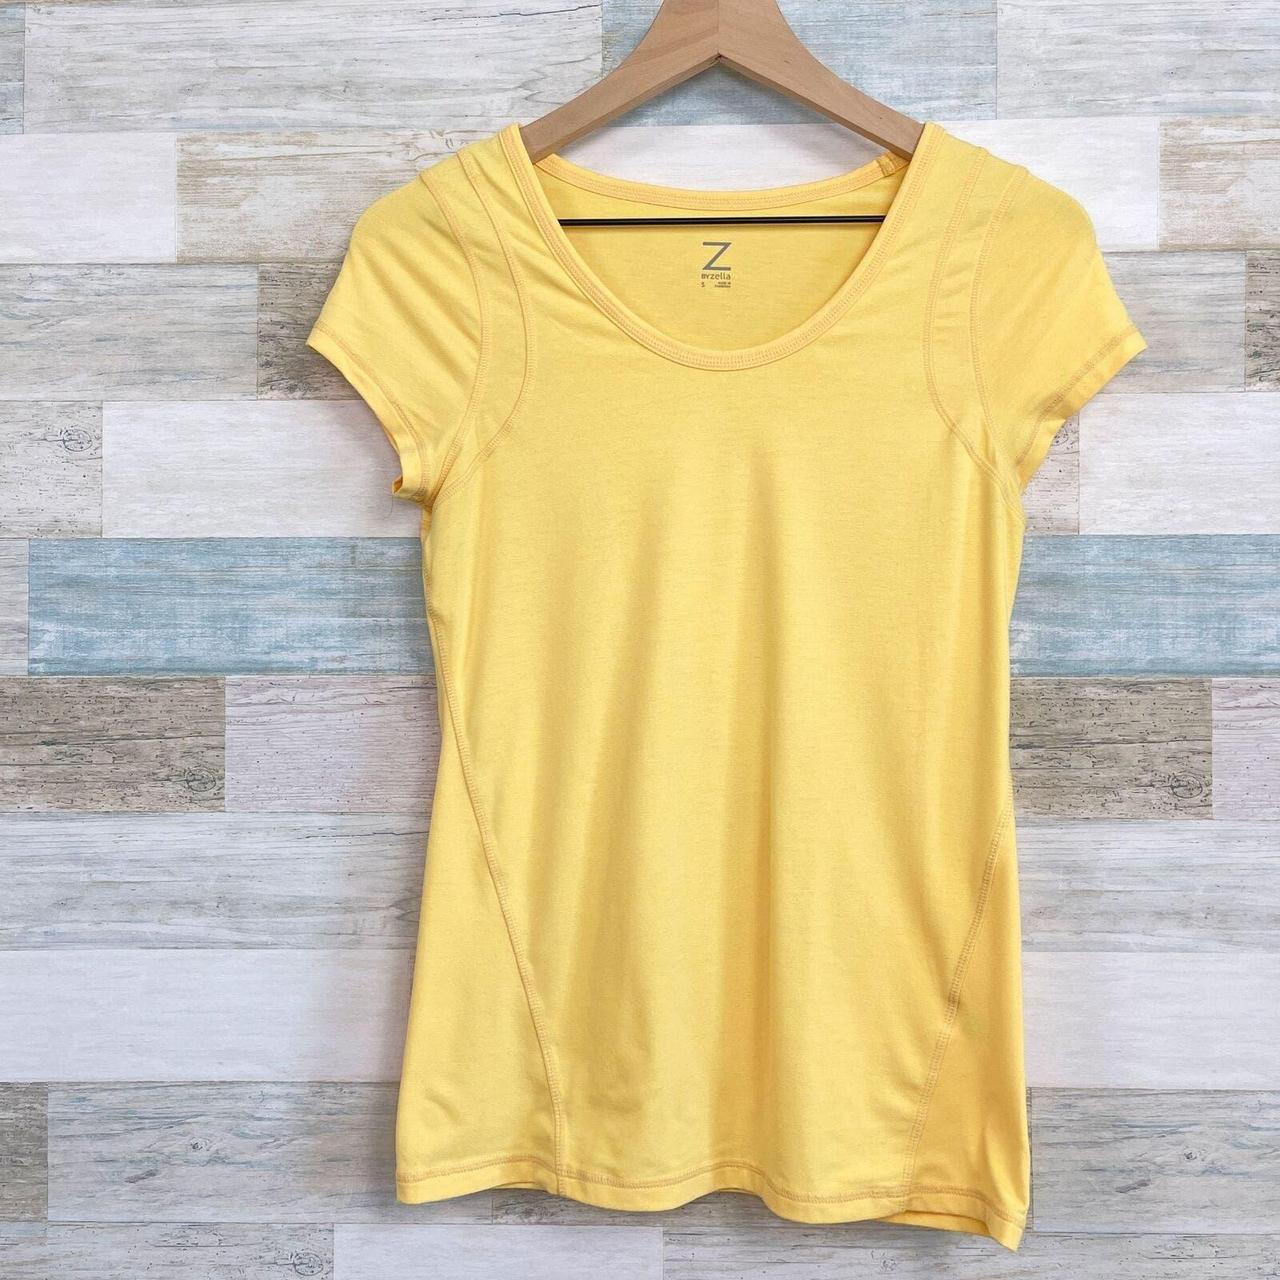 Z By Zella Activewear Basic Tee Color: Yellow - Depop